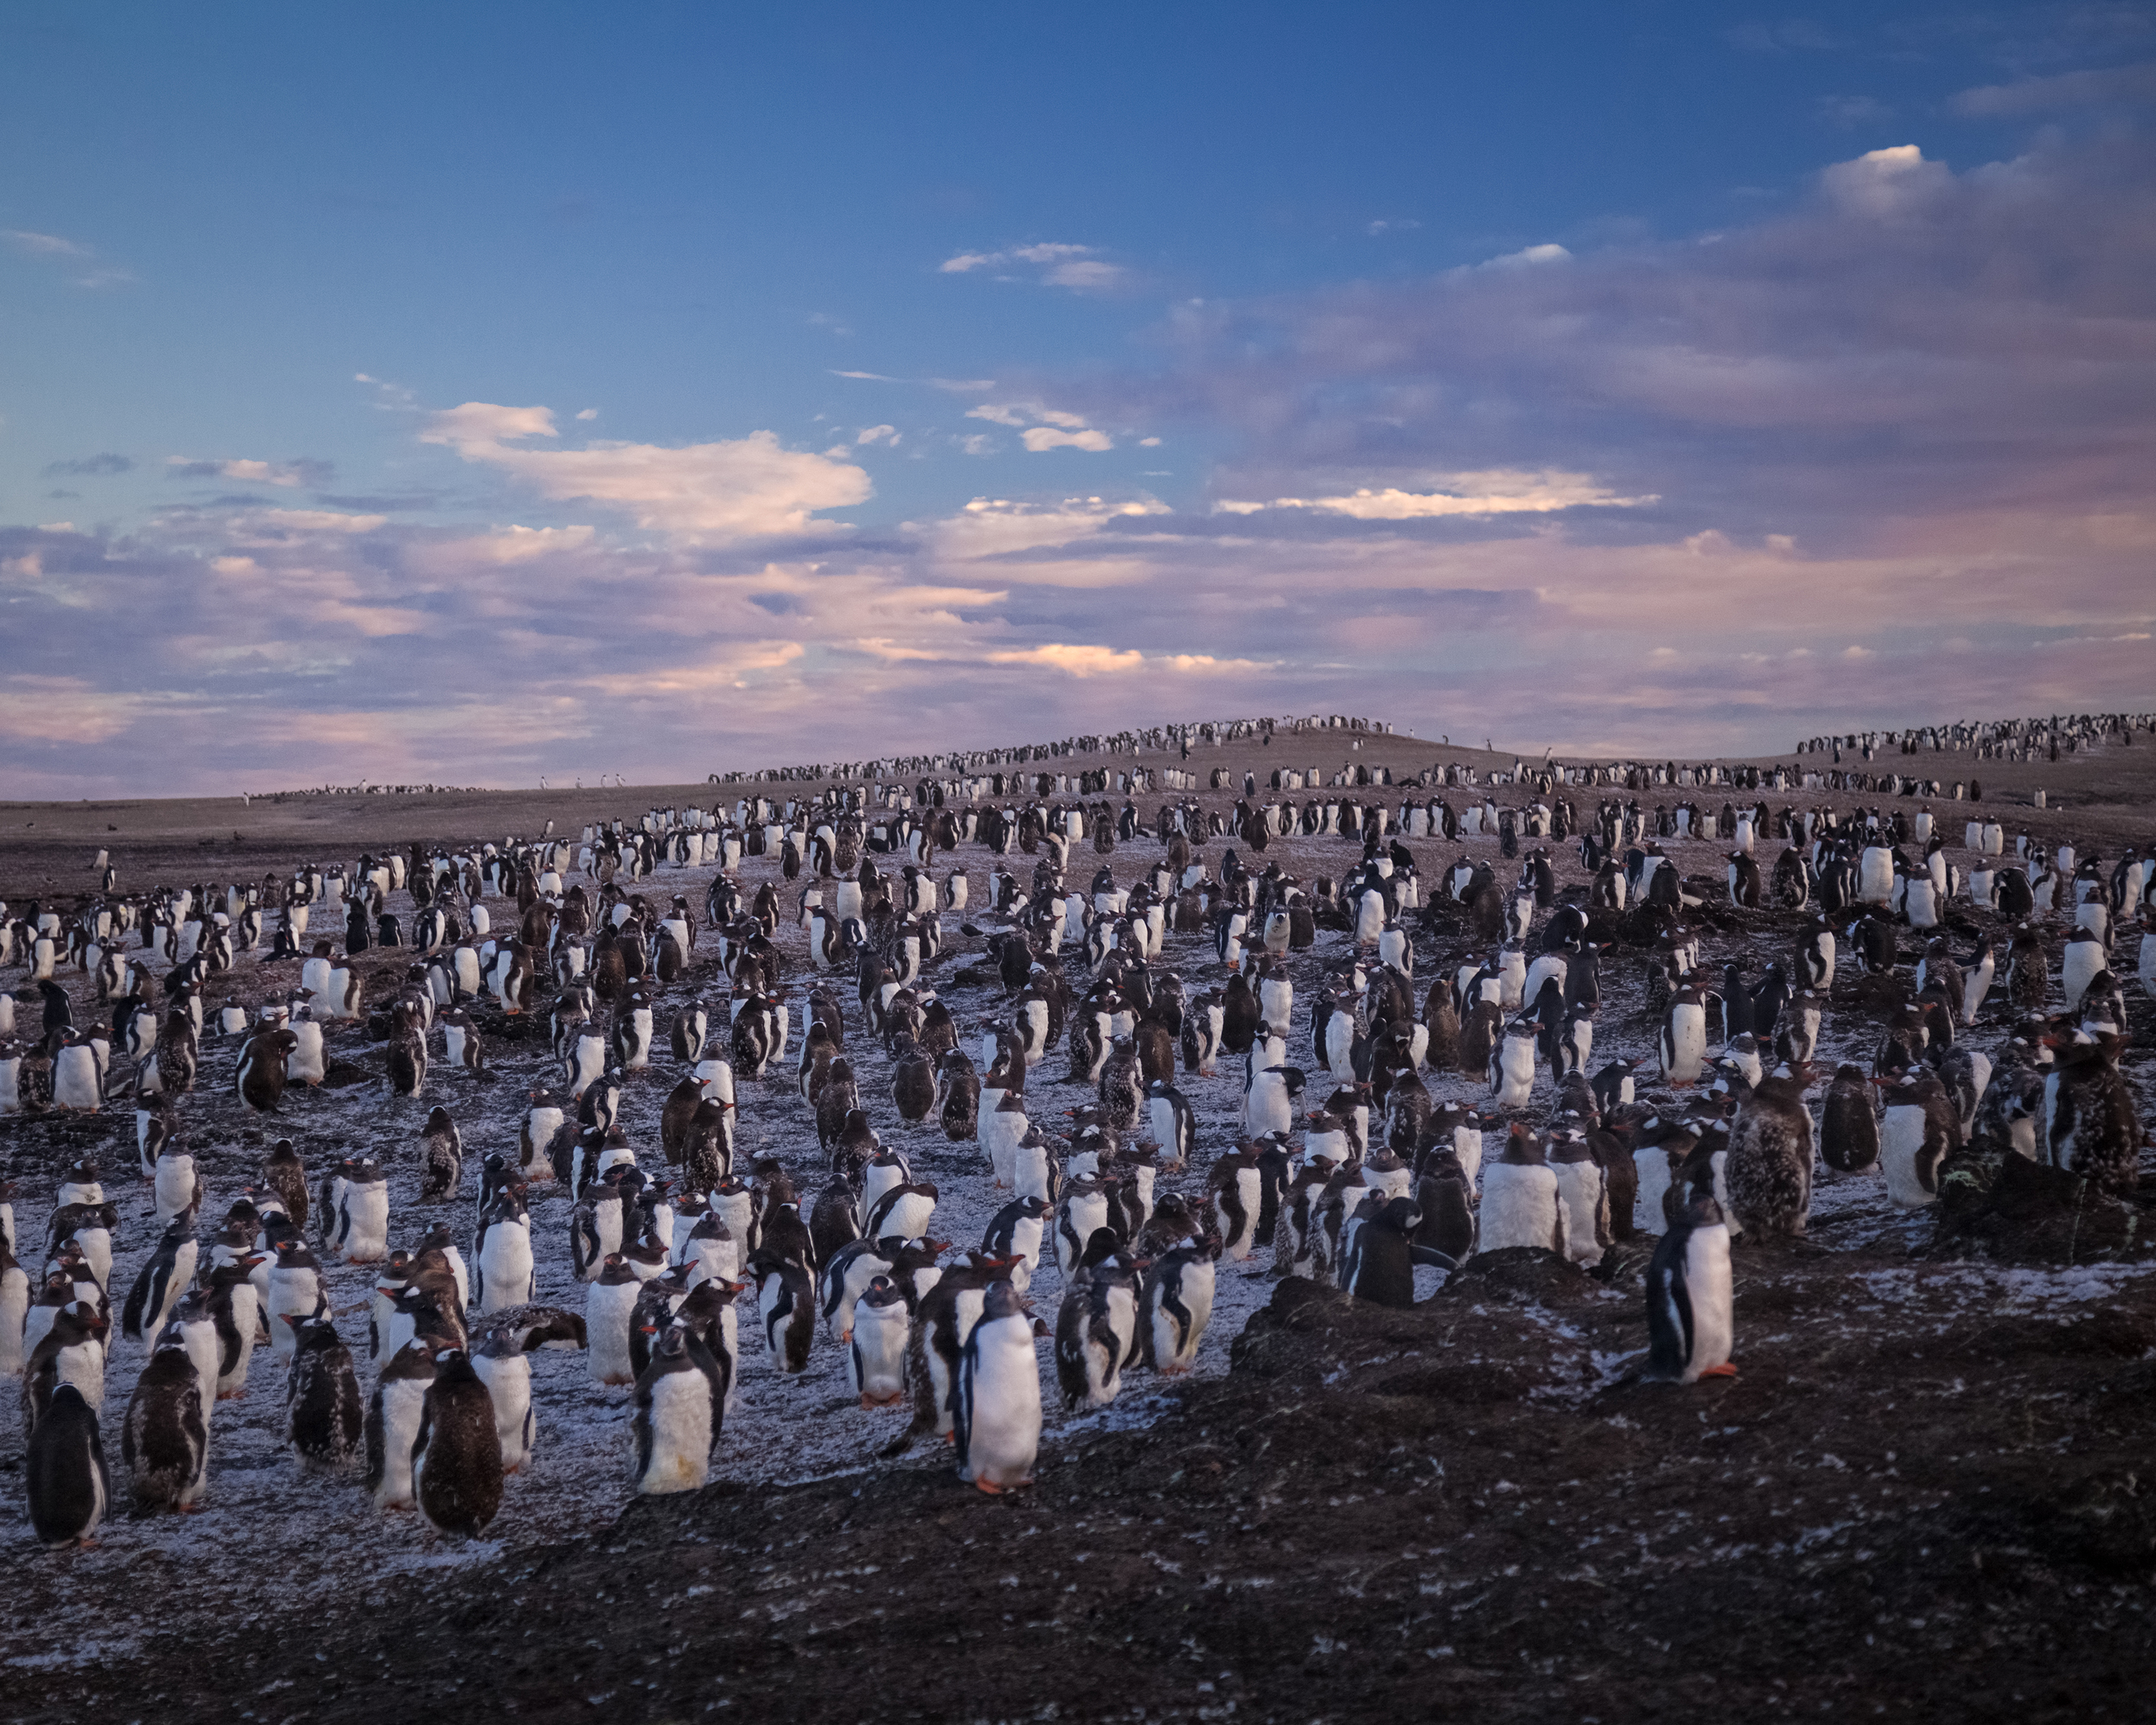 A gentoo penguin colony greets the sunrise at Saunders Island, in the Sub-Antarctic Falkland Islands.